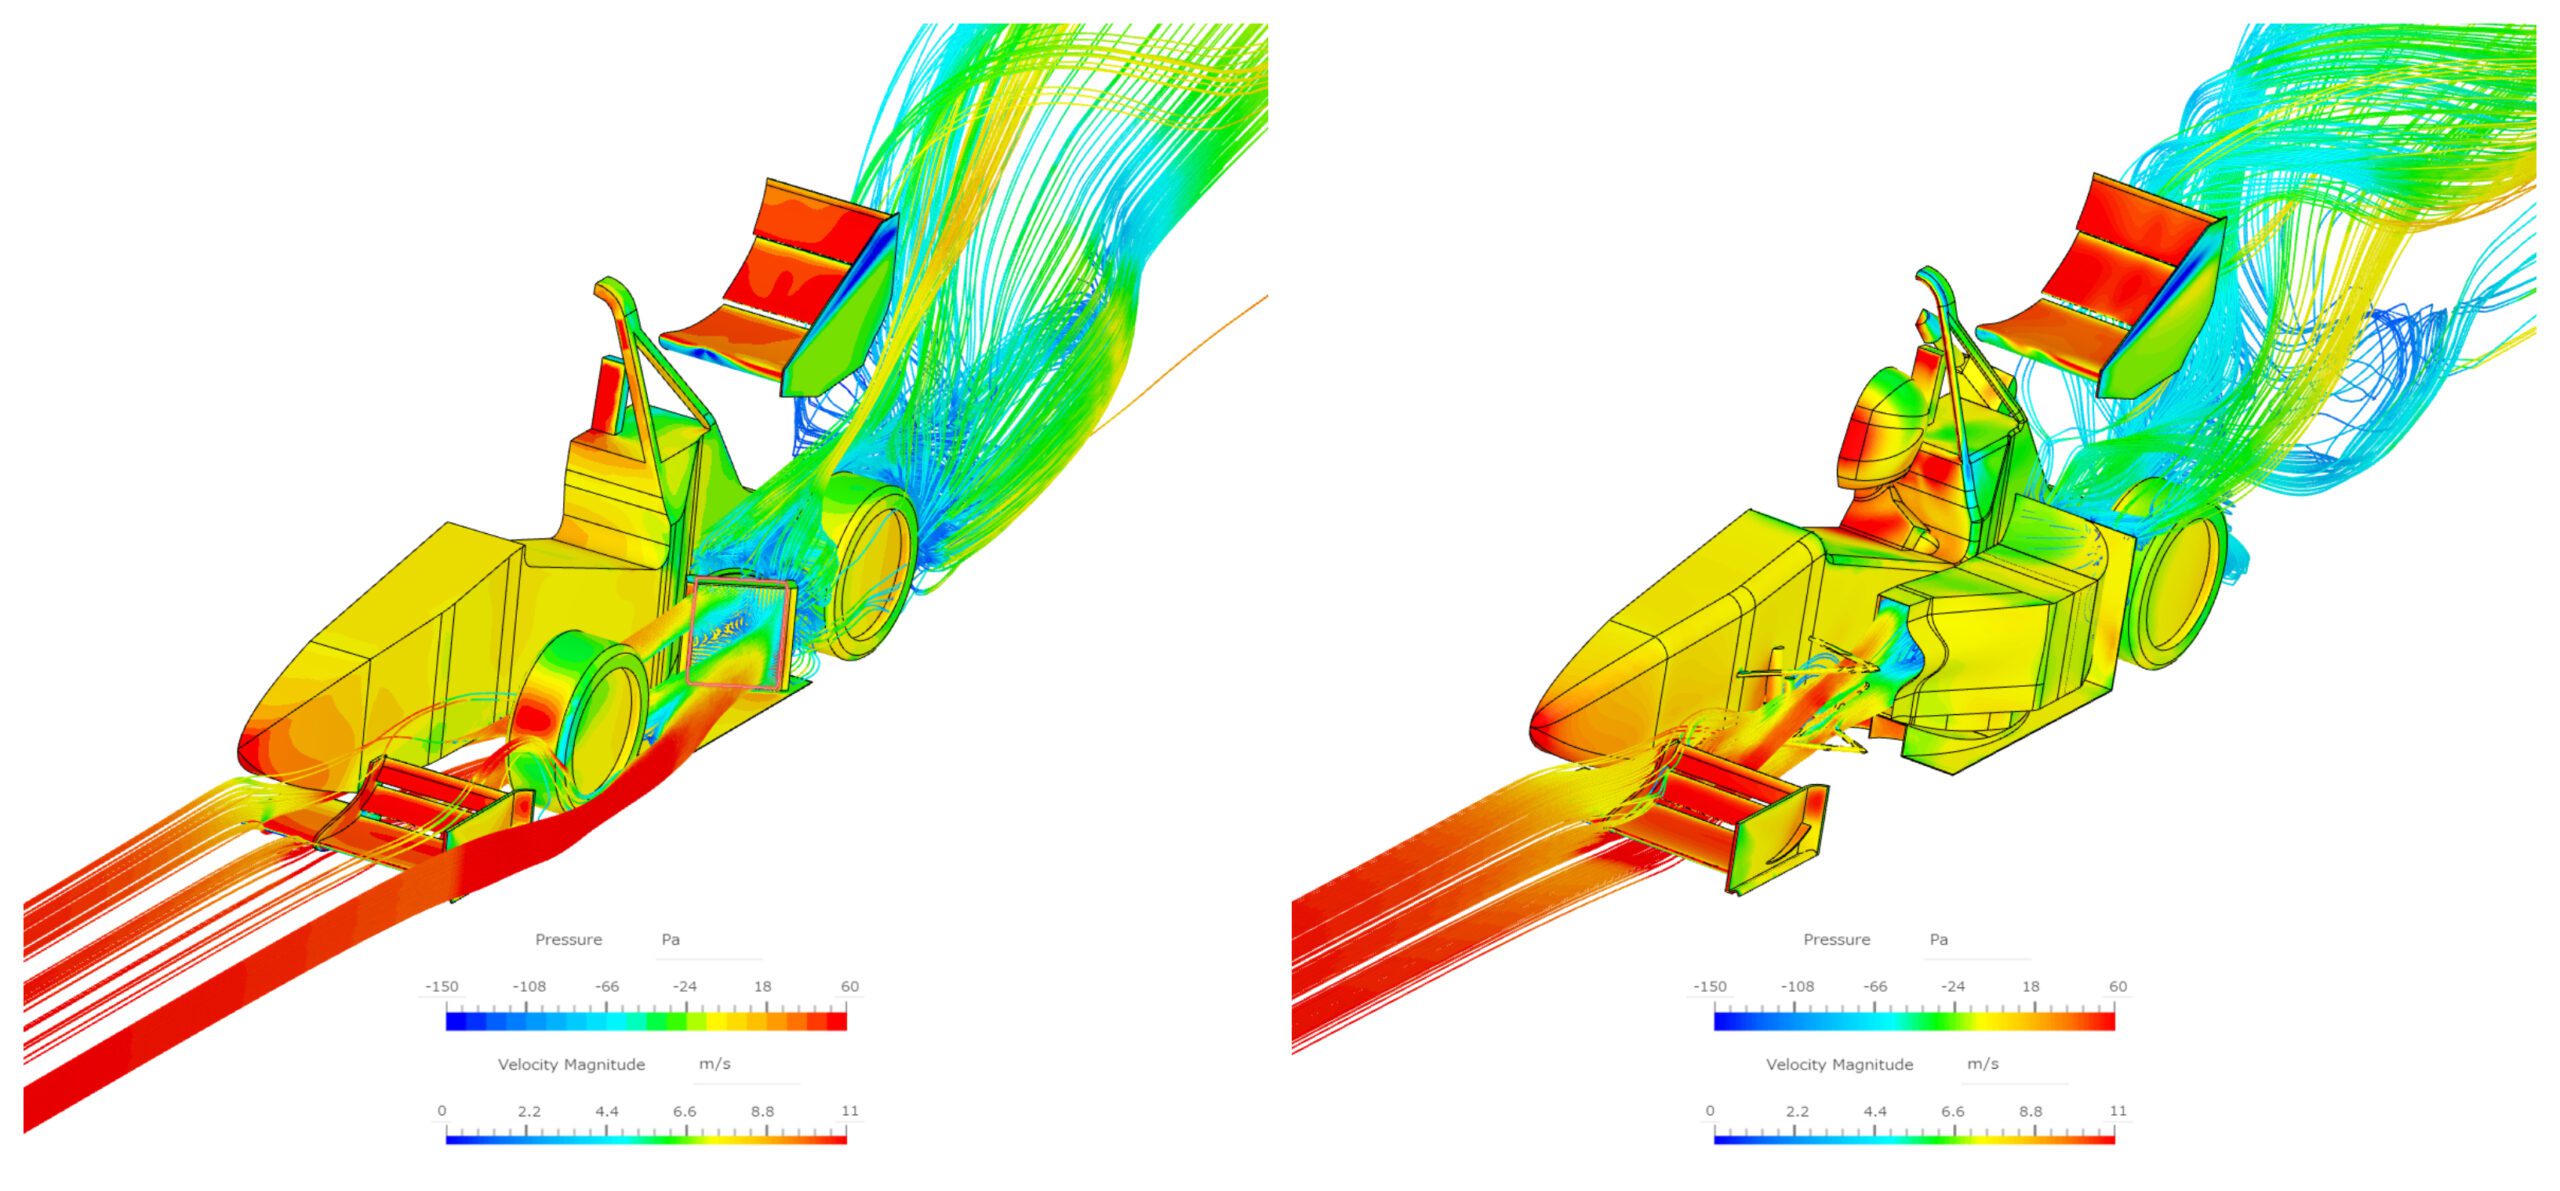 Pressure and velocity contours in SimScale on the initial and final designs of a formula-design race car